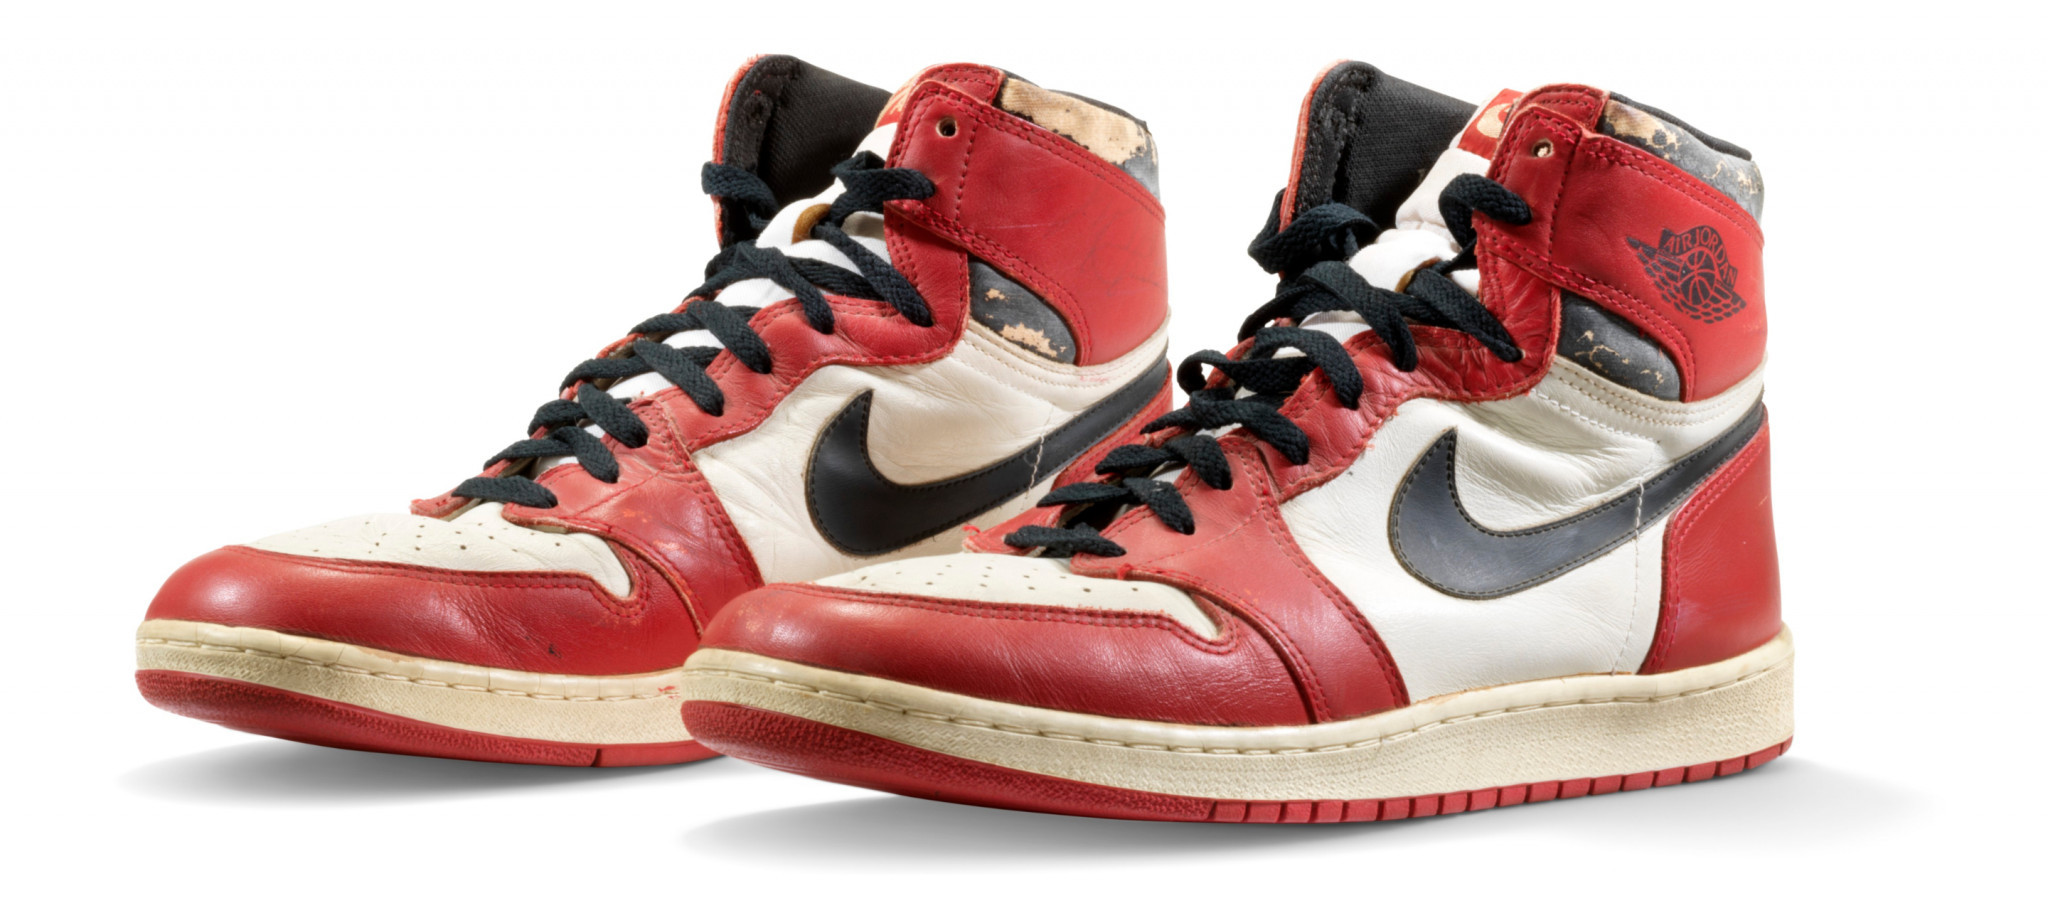 Pair of Michael Jordan trainers sell for record $615,000 at auction 